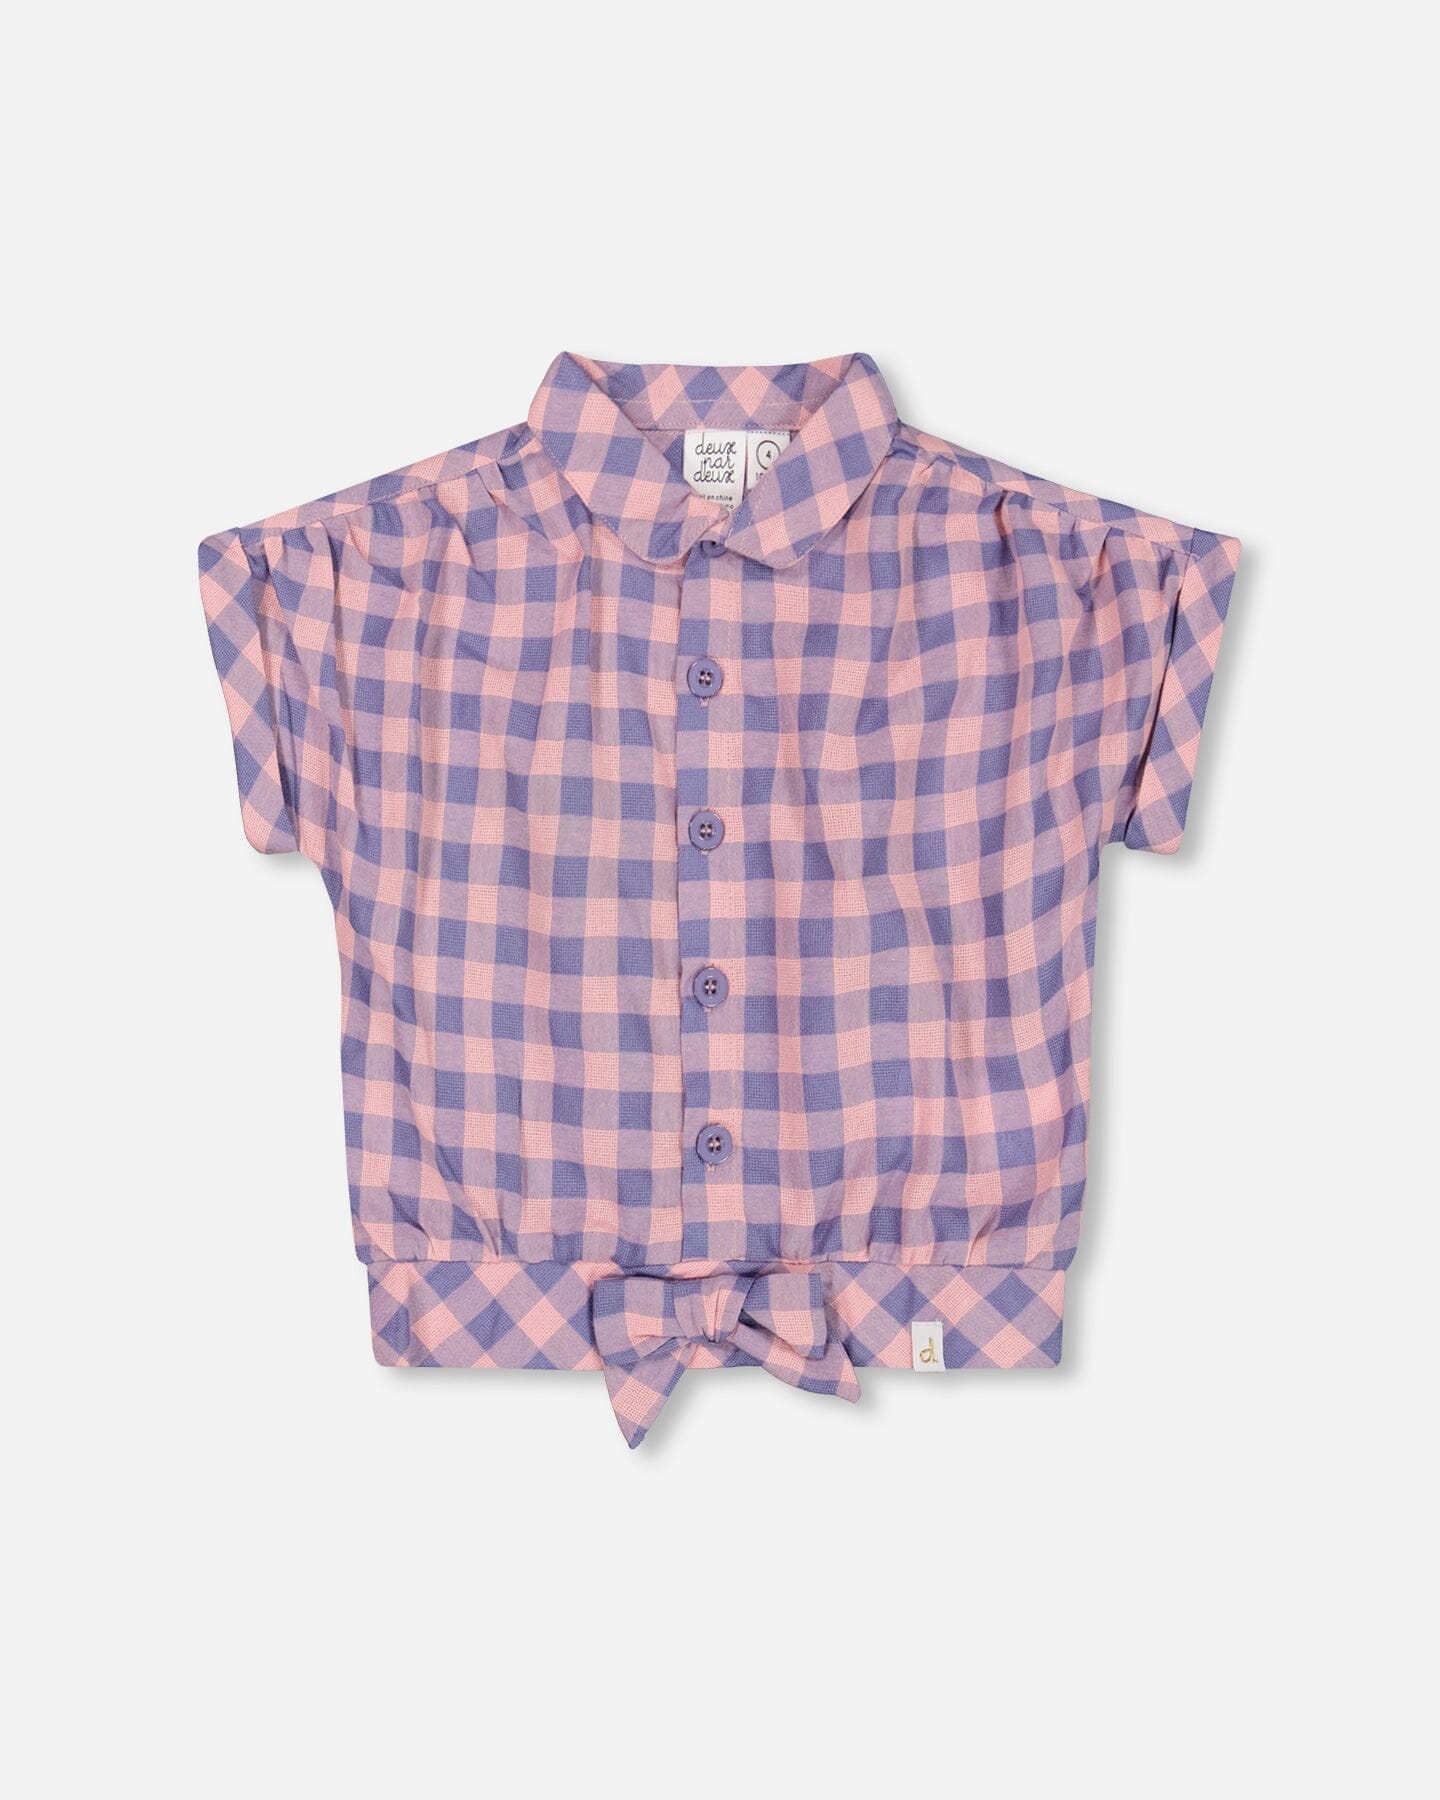 Blouse With Knot Plaid Pink And Blue - F30I15_082